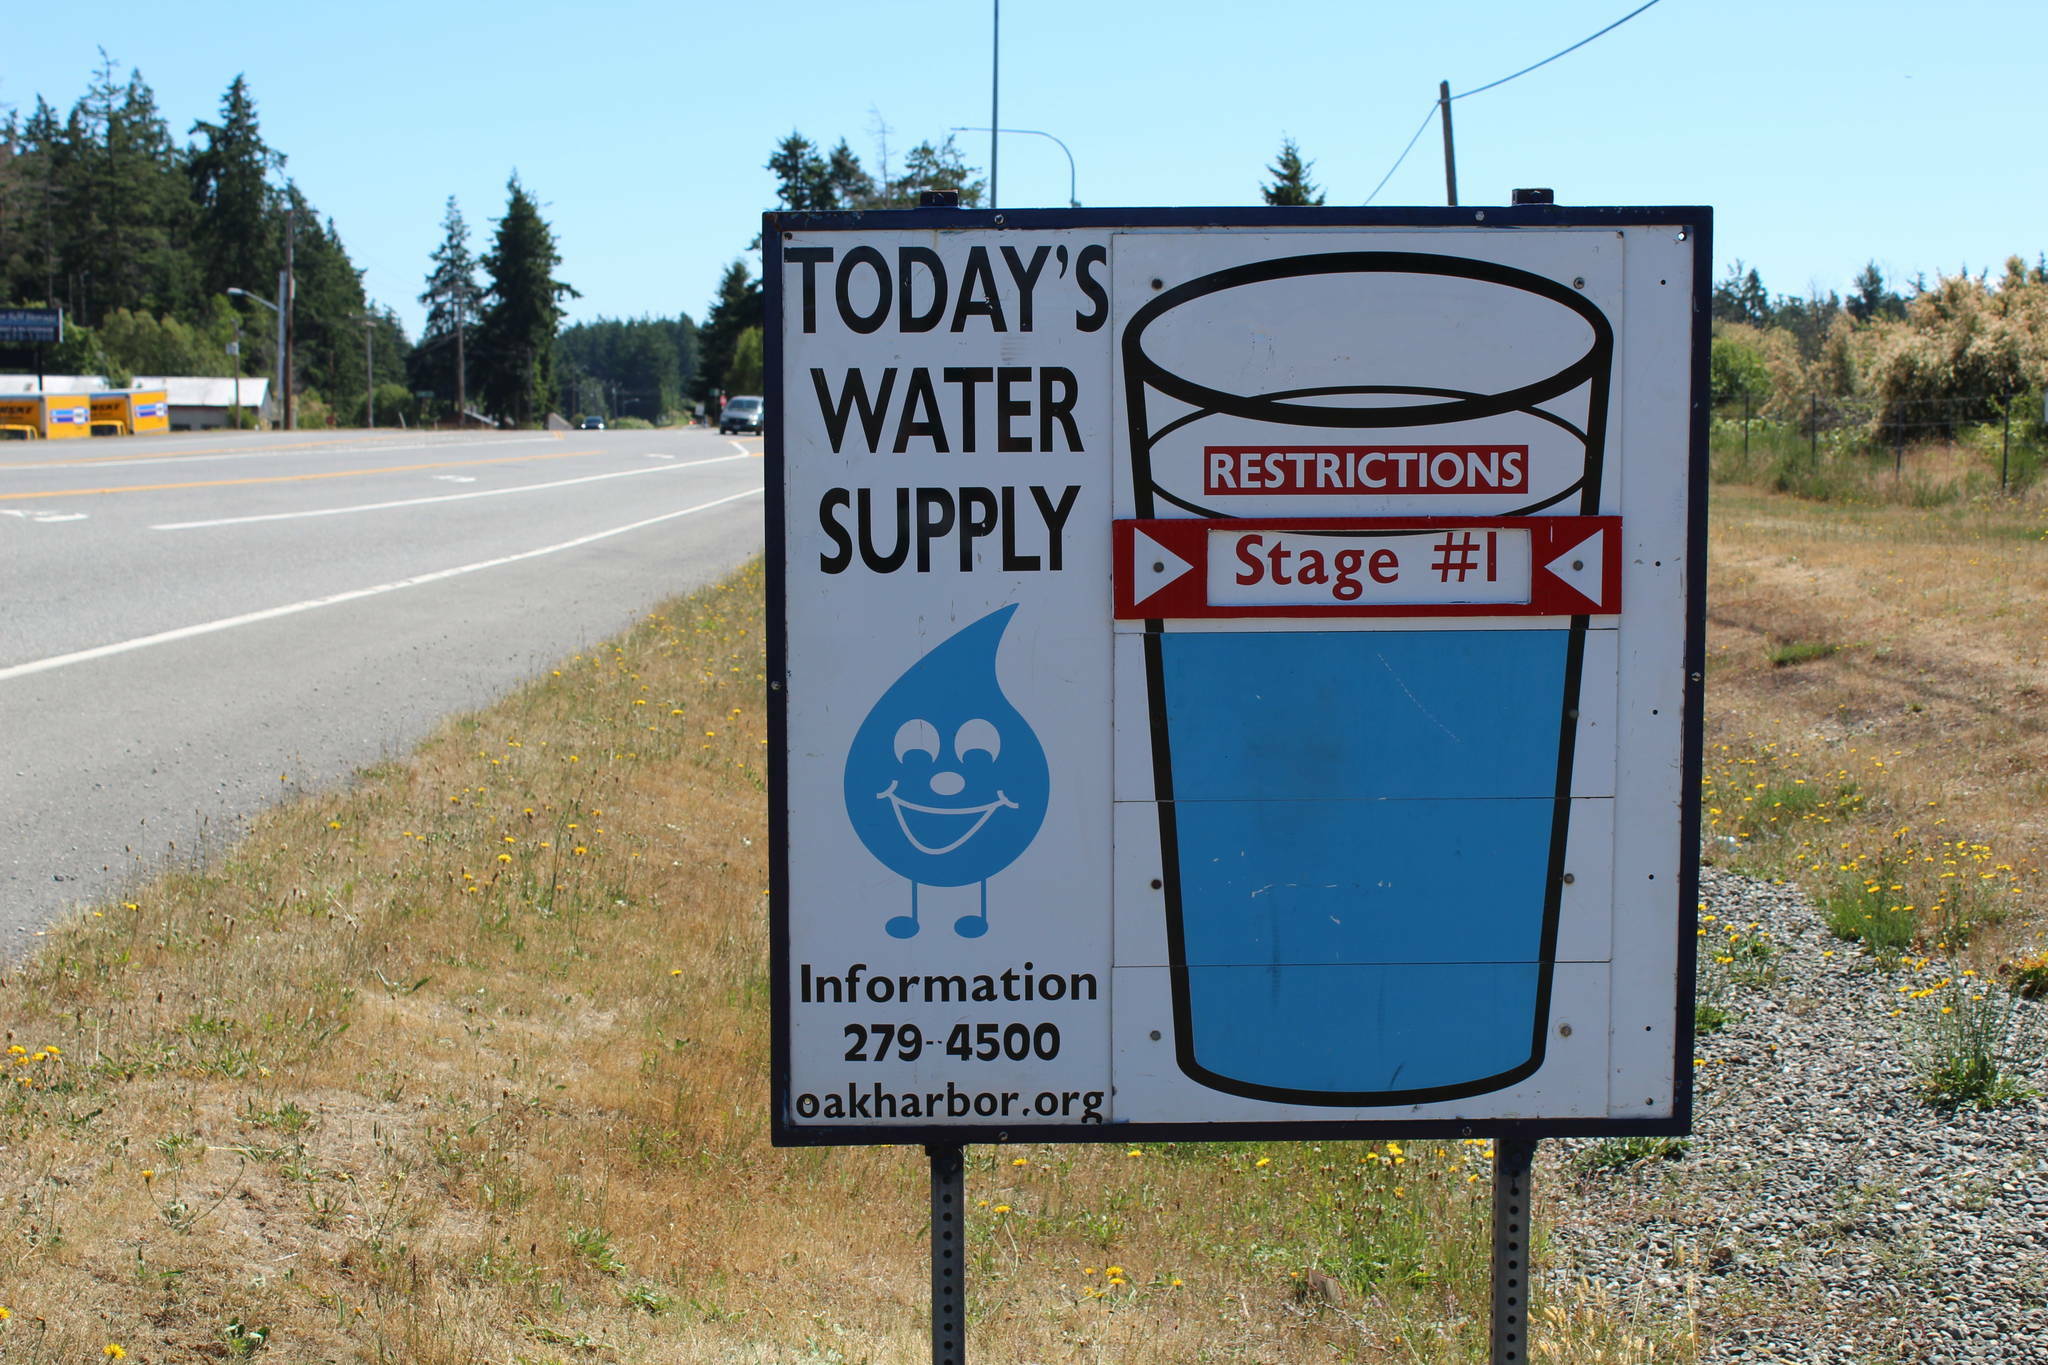 Photo by Karina Andrew/Whidbey News-Times
Oak Harbor is currently in Stage 1 of water restrictions, which means residents are asked to voluntarily reduce water usage.